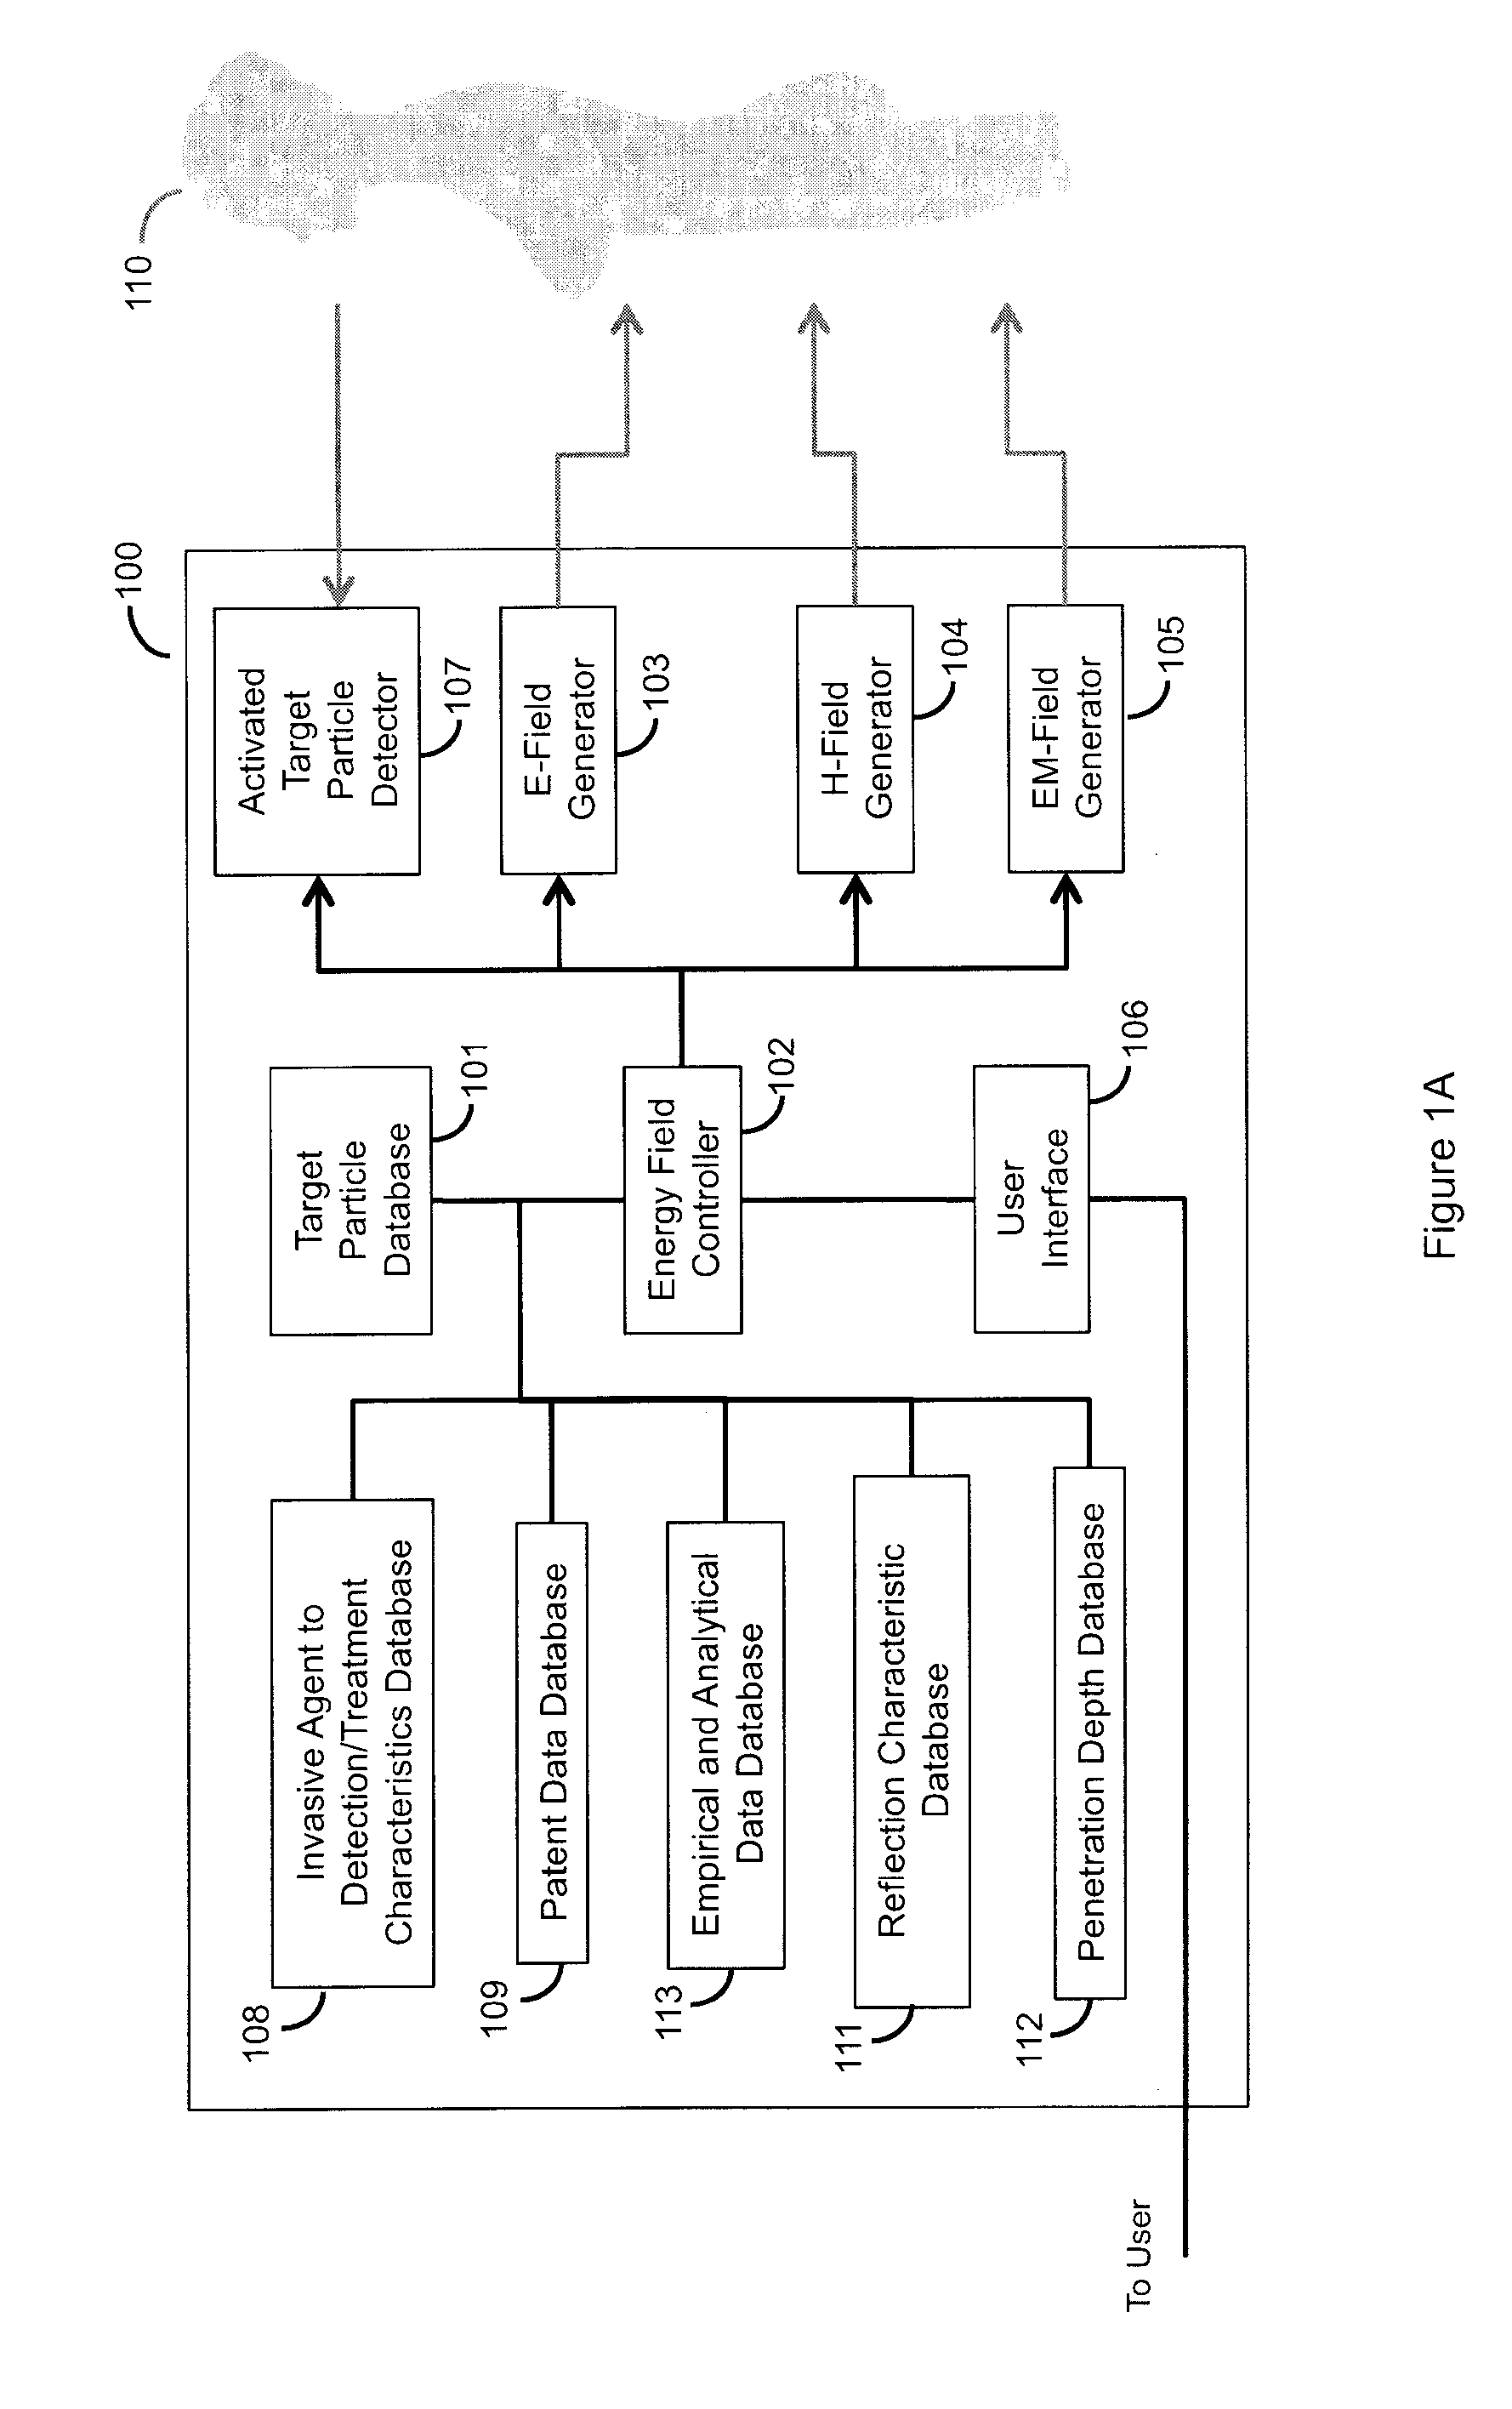 System for correlating energy field characteristics with target particle characteristics in the application of an energy field to a living organism for treatment of invasive agents